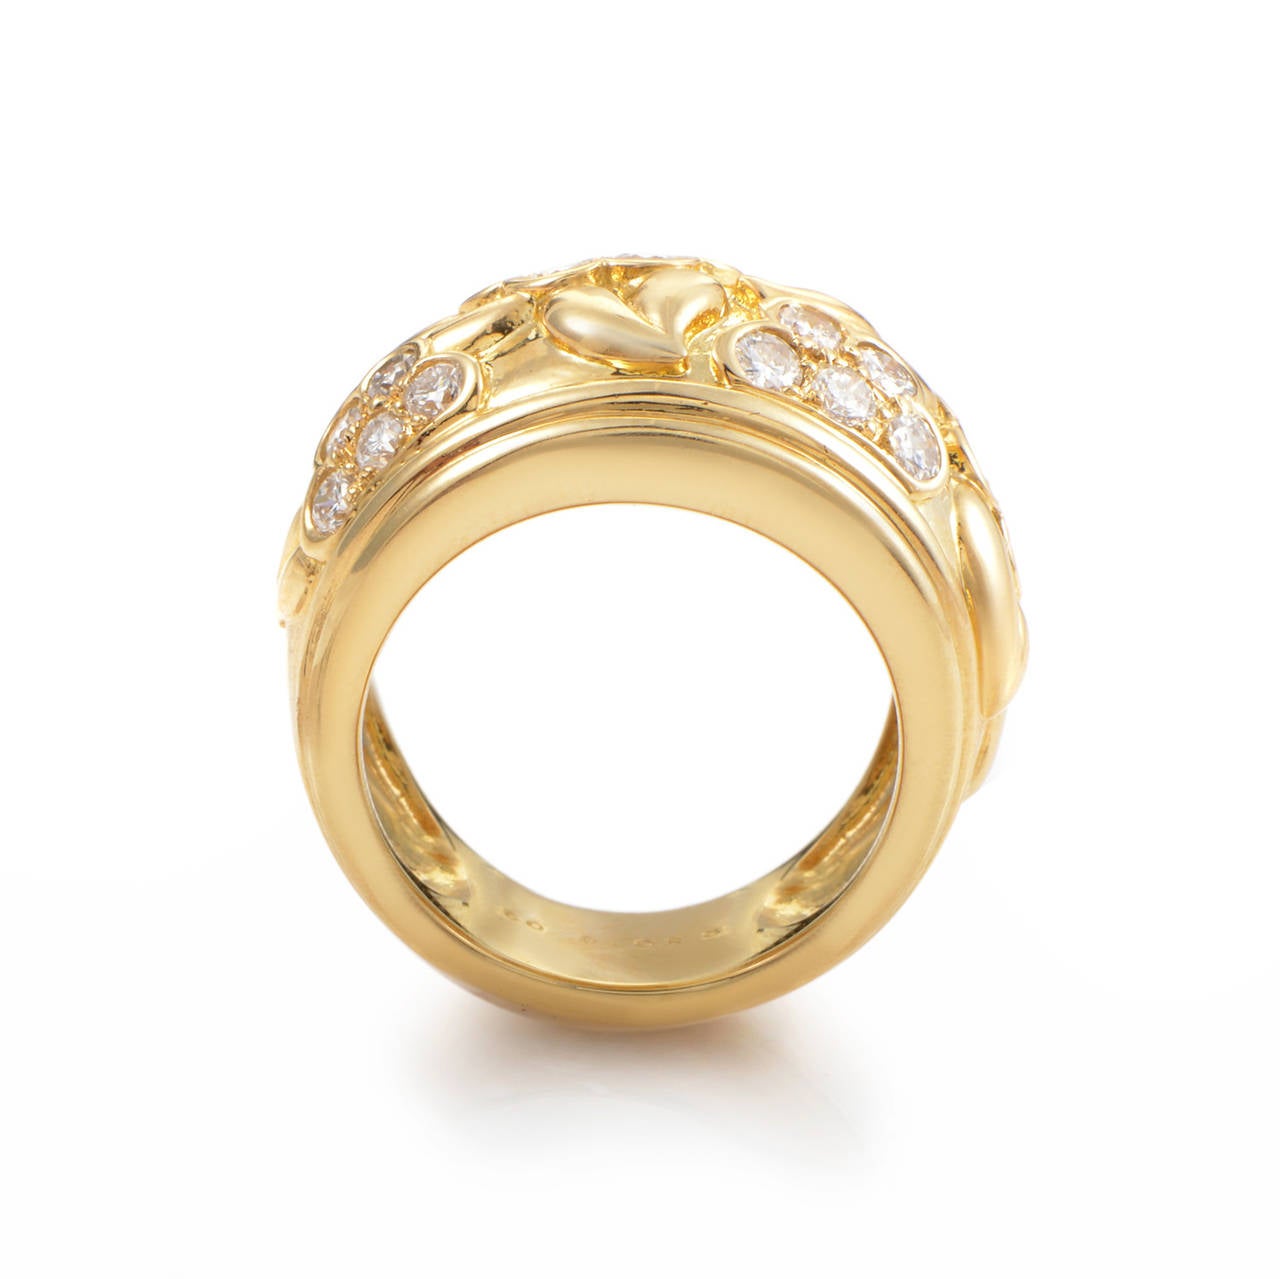 This band ring from Dior has a phenomenal design that sparkles with the finest of diamonds. The ring is made of 18K yellow gold and boasts a floral diamond design. Absolutely marvelous!

Ring Size: 6.25 (52 1/8)
Diamond Carat Weight: 1.00